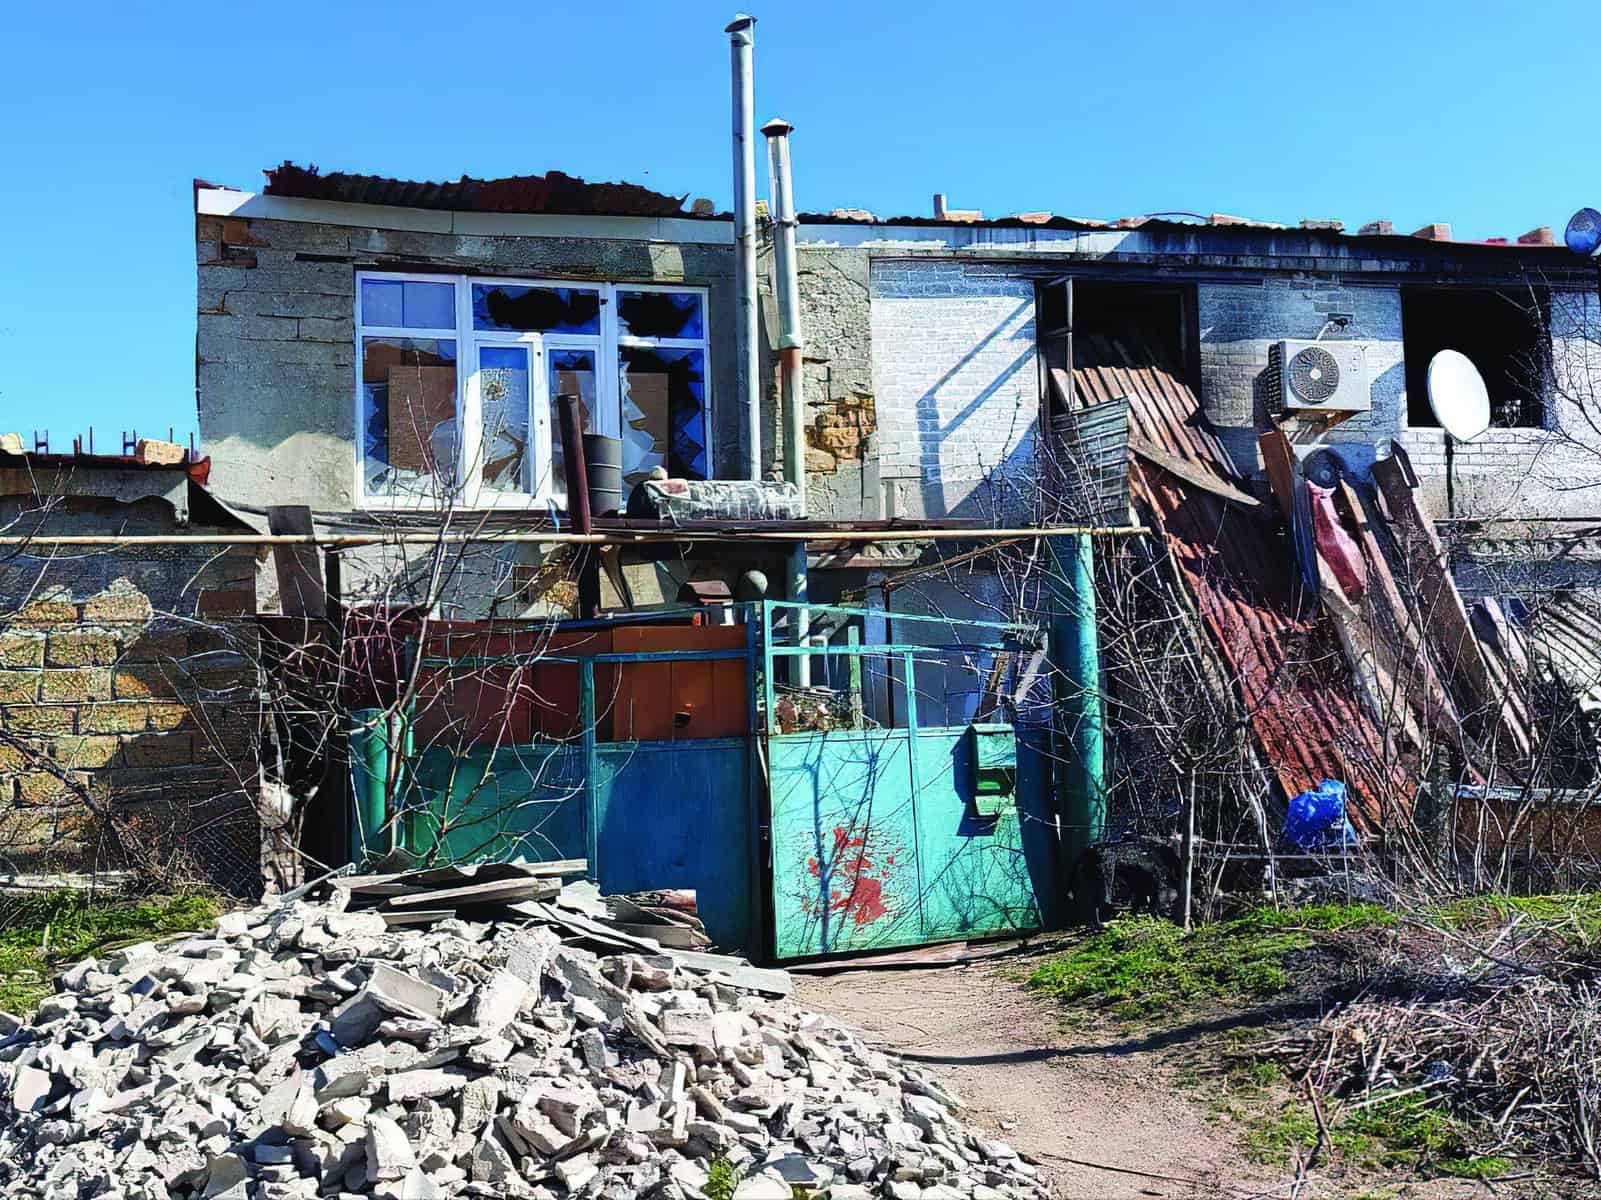 Russian missiles continue to indiscriminately destroy civilian homes and infrastructure.